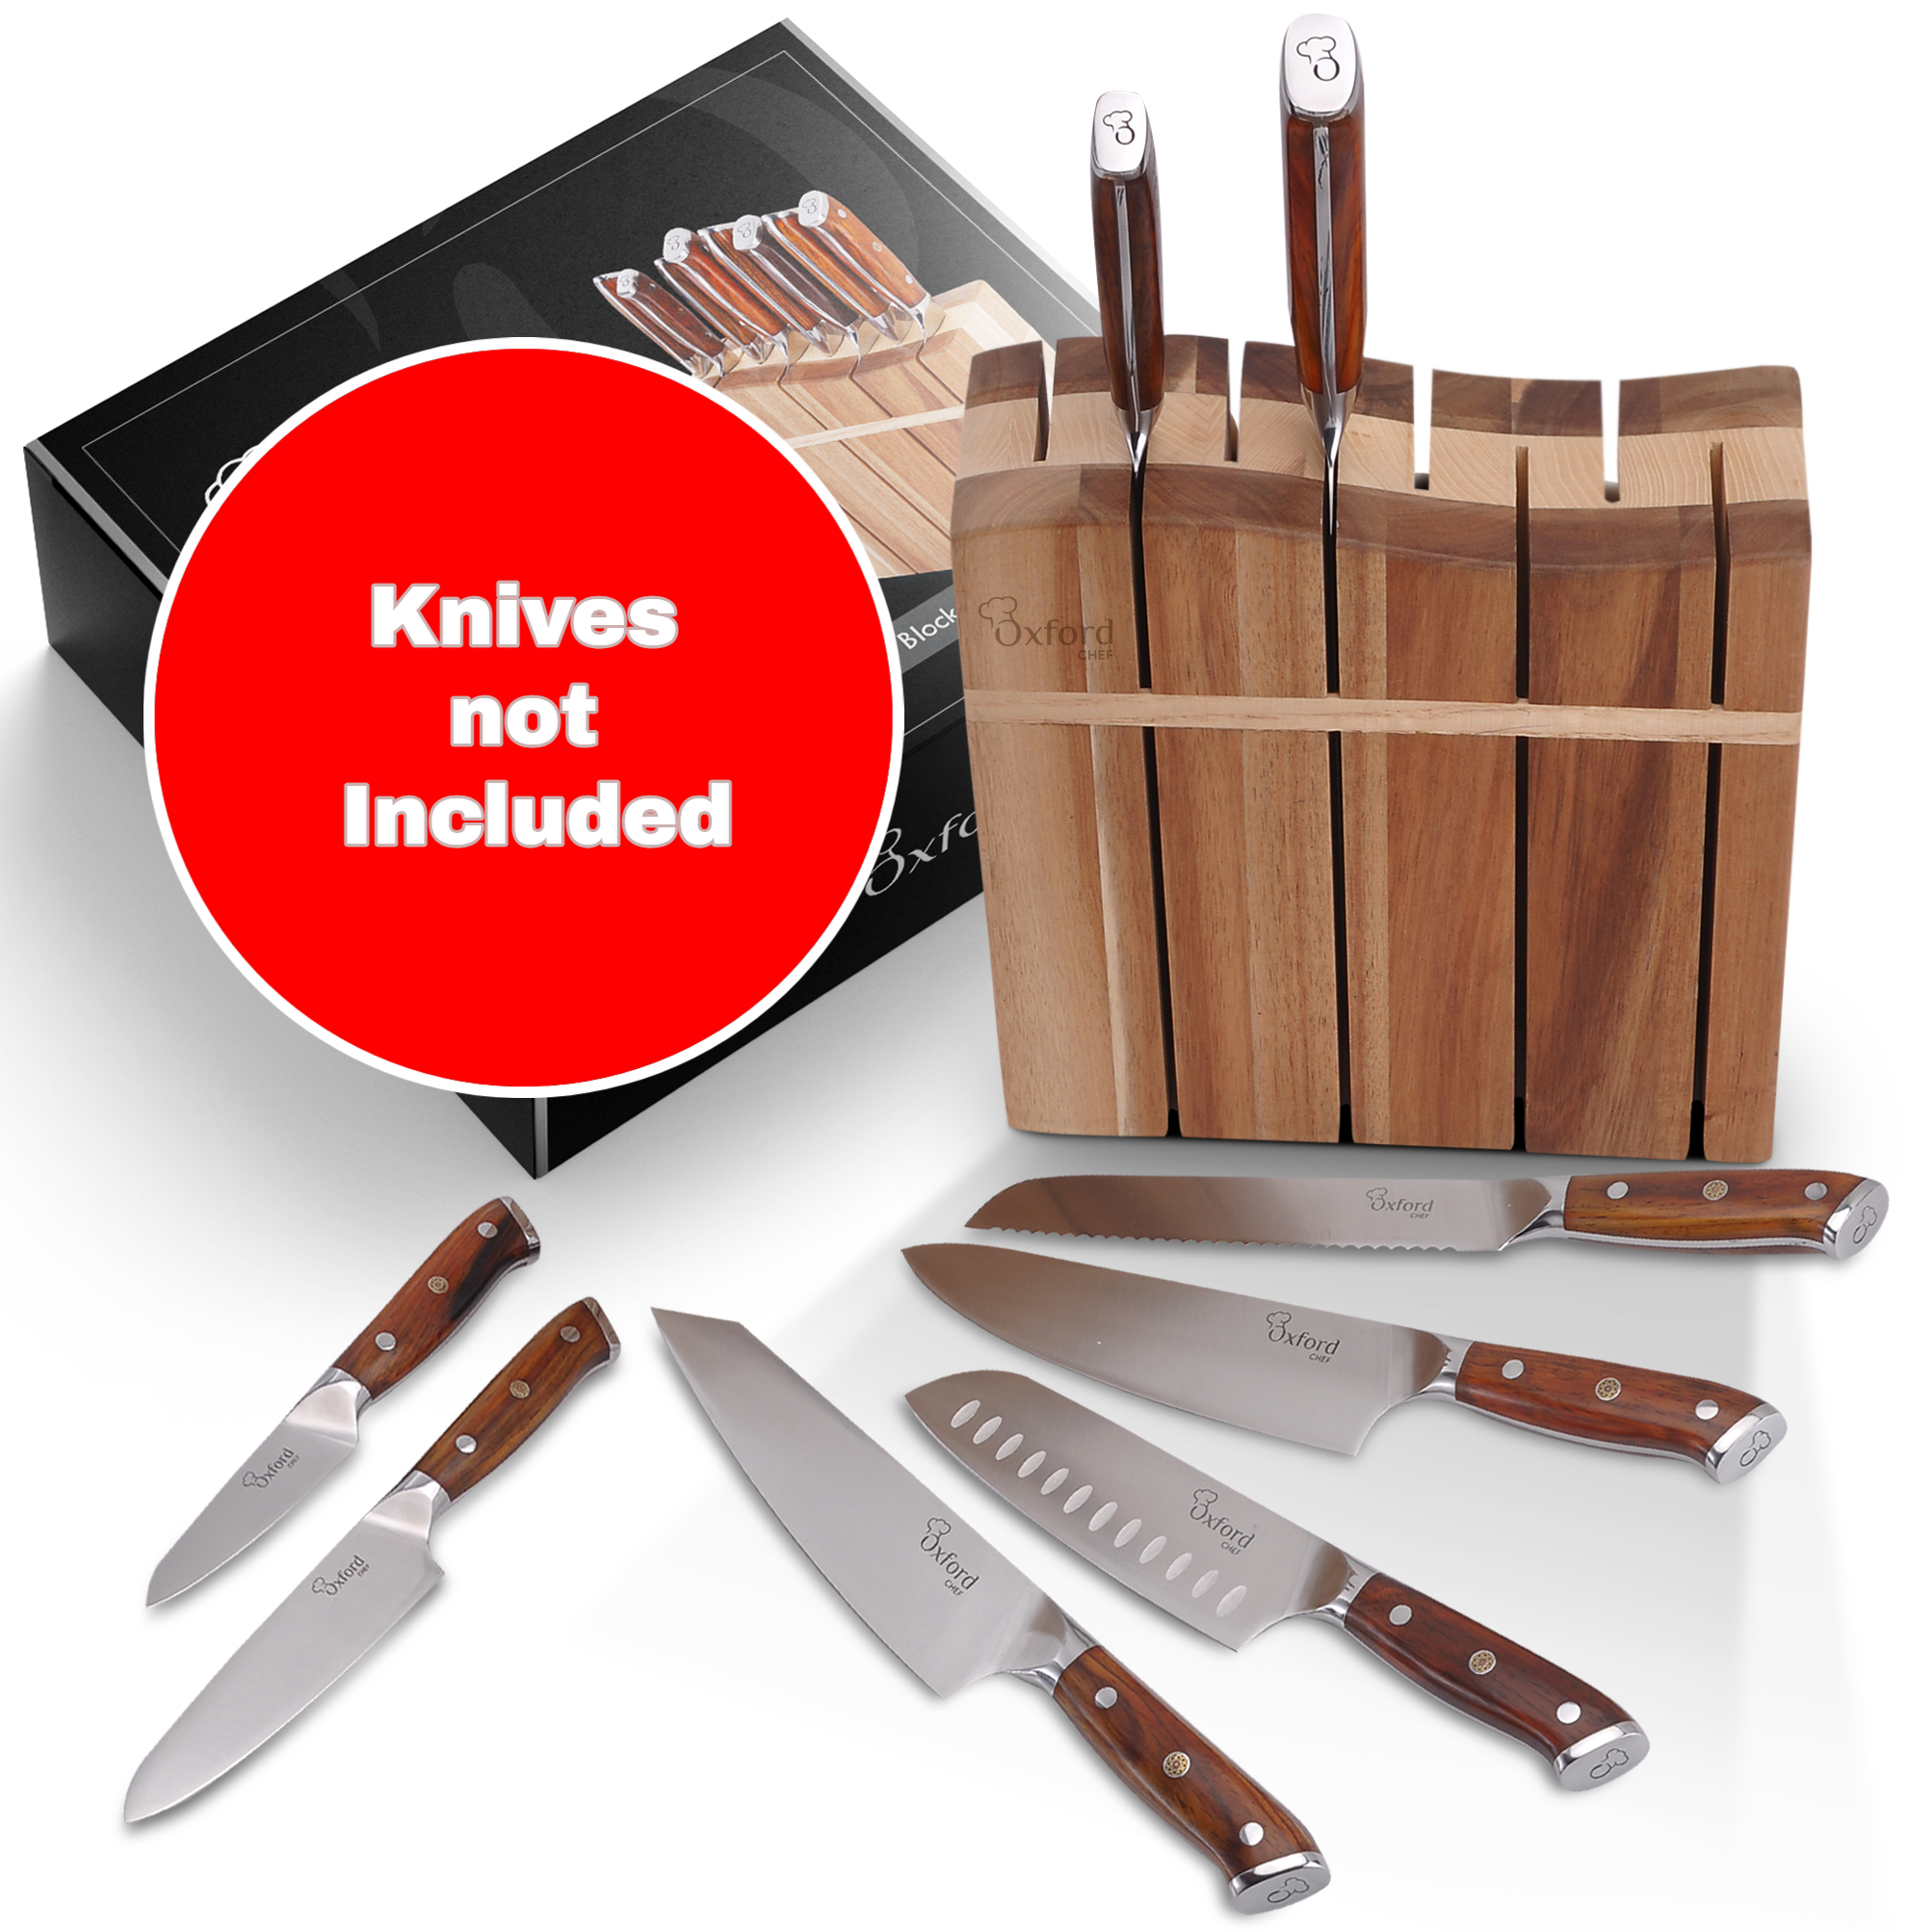 Wooden Kitchen Knife Block - Luxury Hand-Crafted Acacia Wood 8